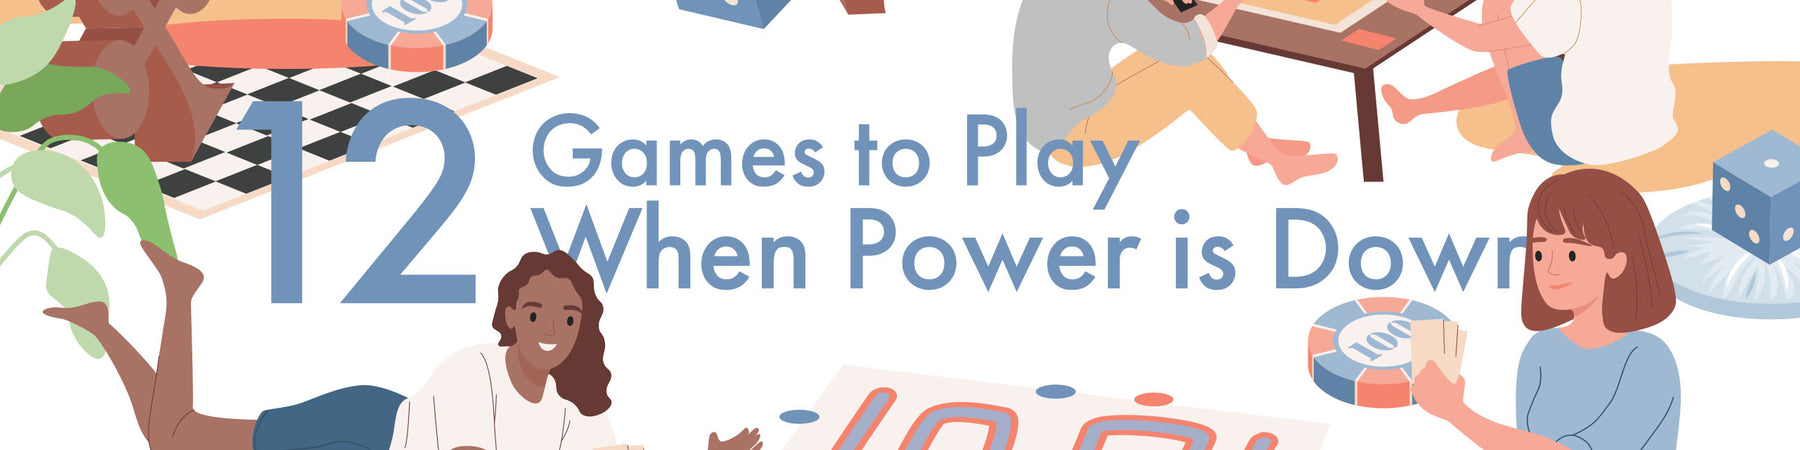 12 Games to Play When The Power or Internet is Down (or Anytime)